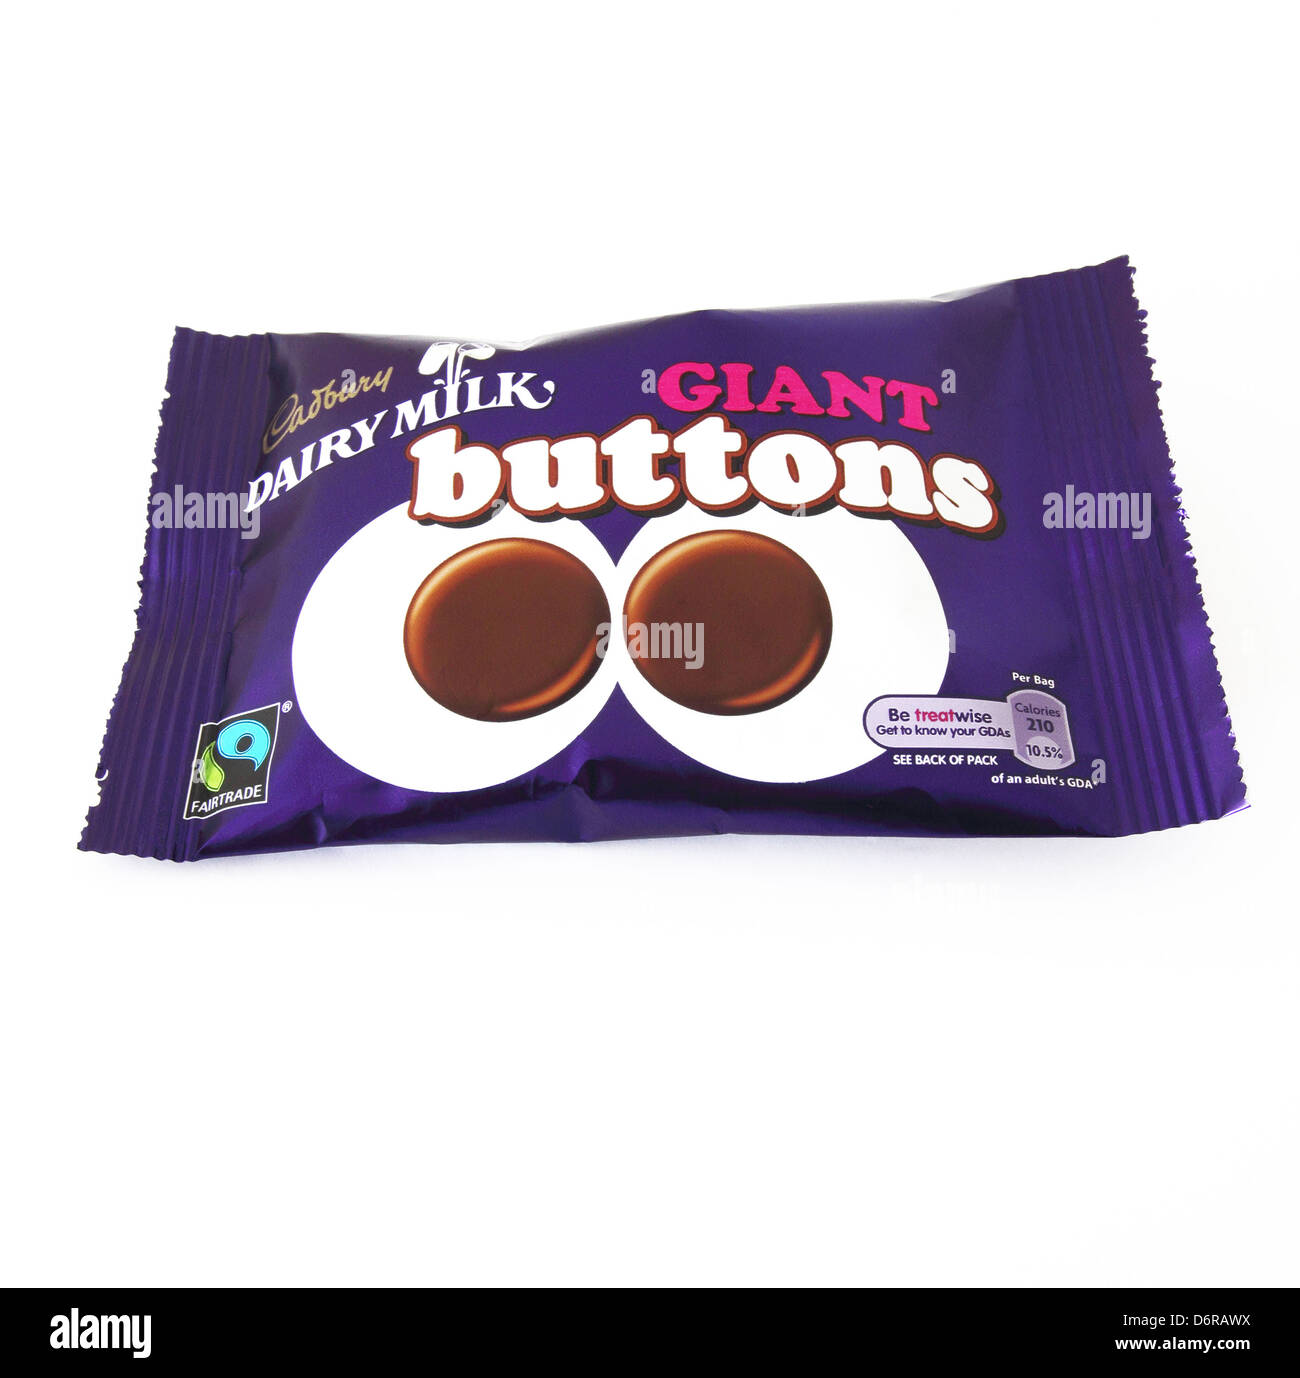 Cadbury's Giant Chocolate Buttons on a White Background Stock Photo